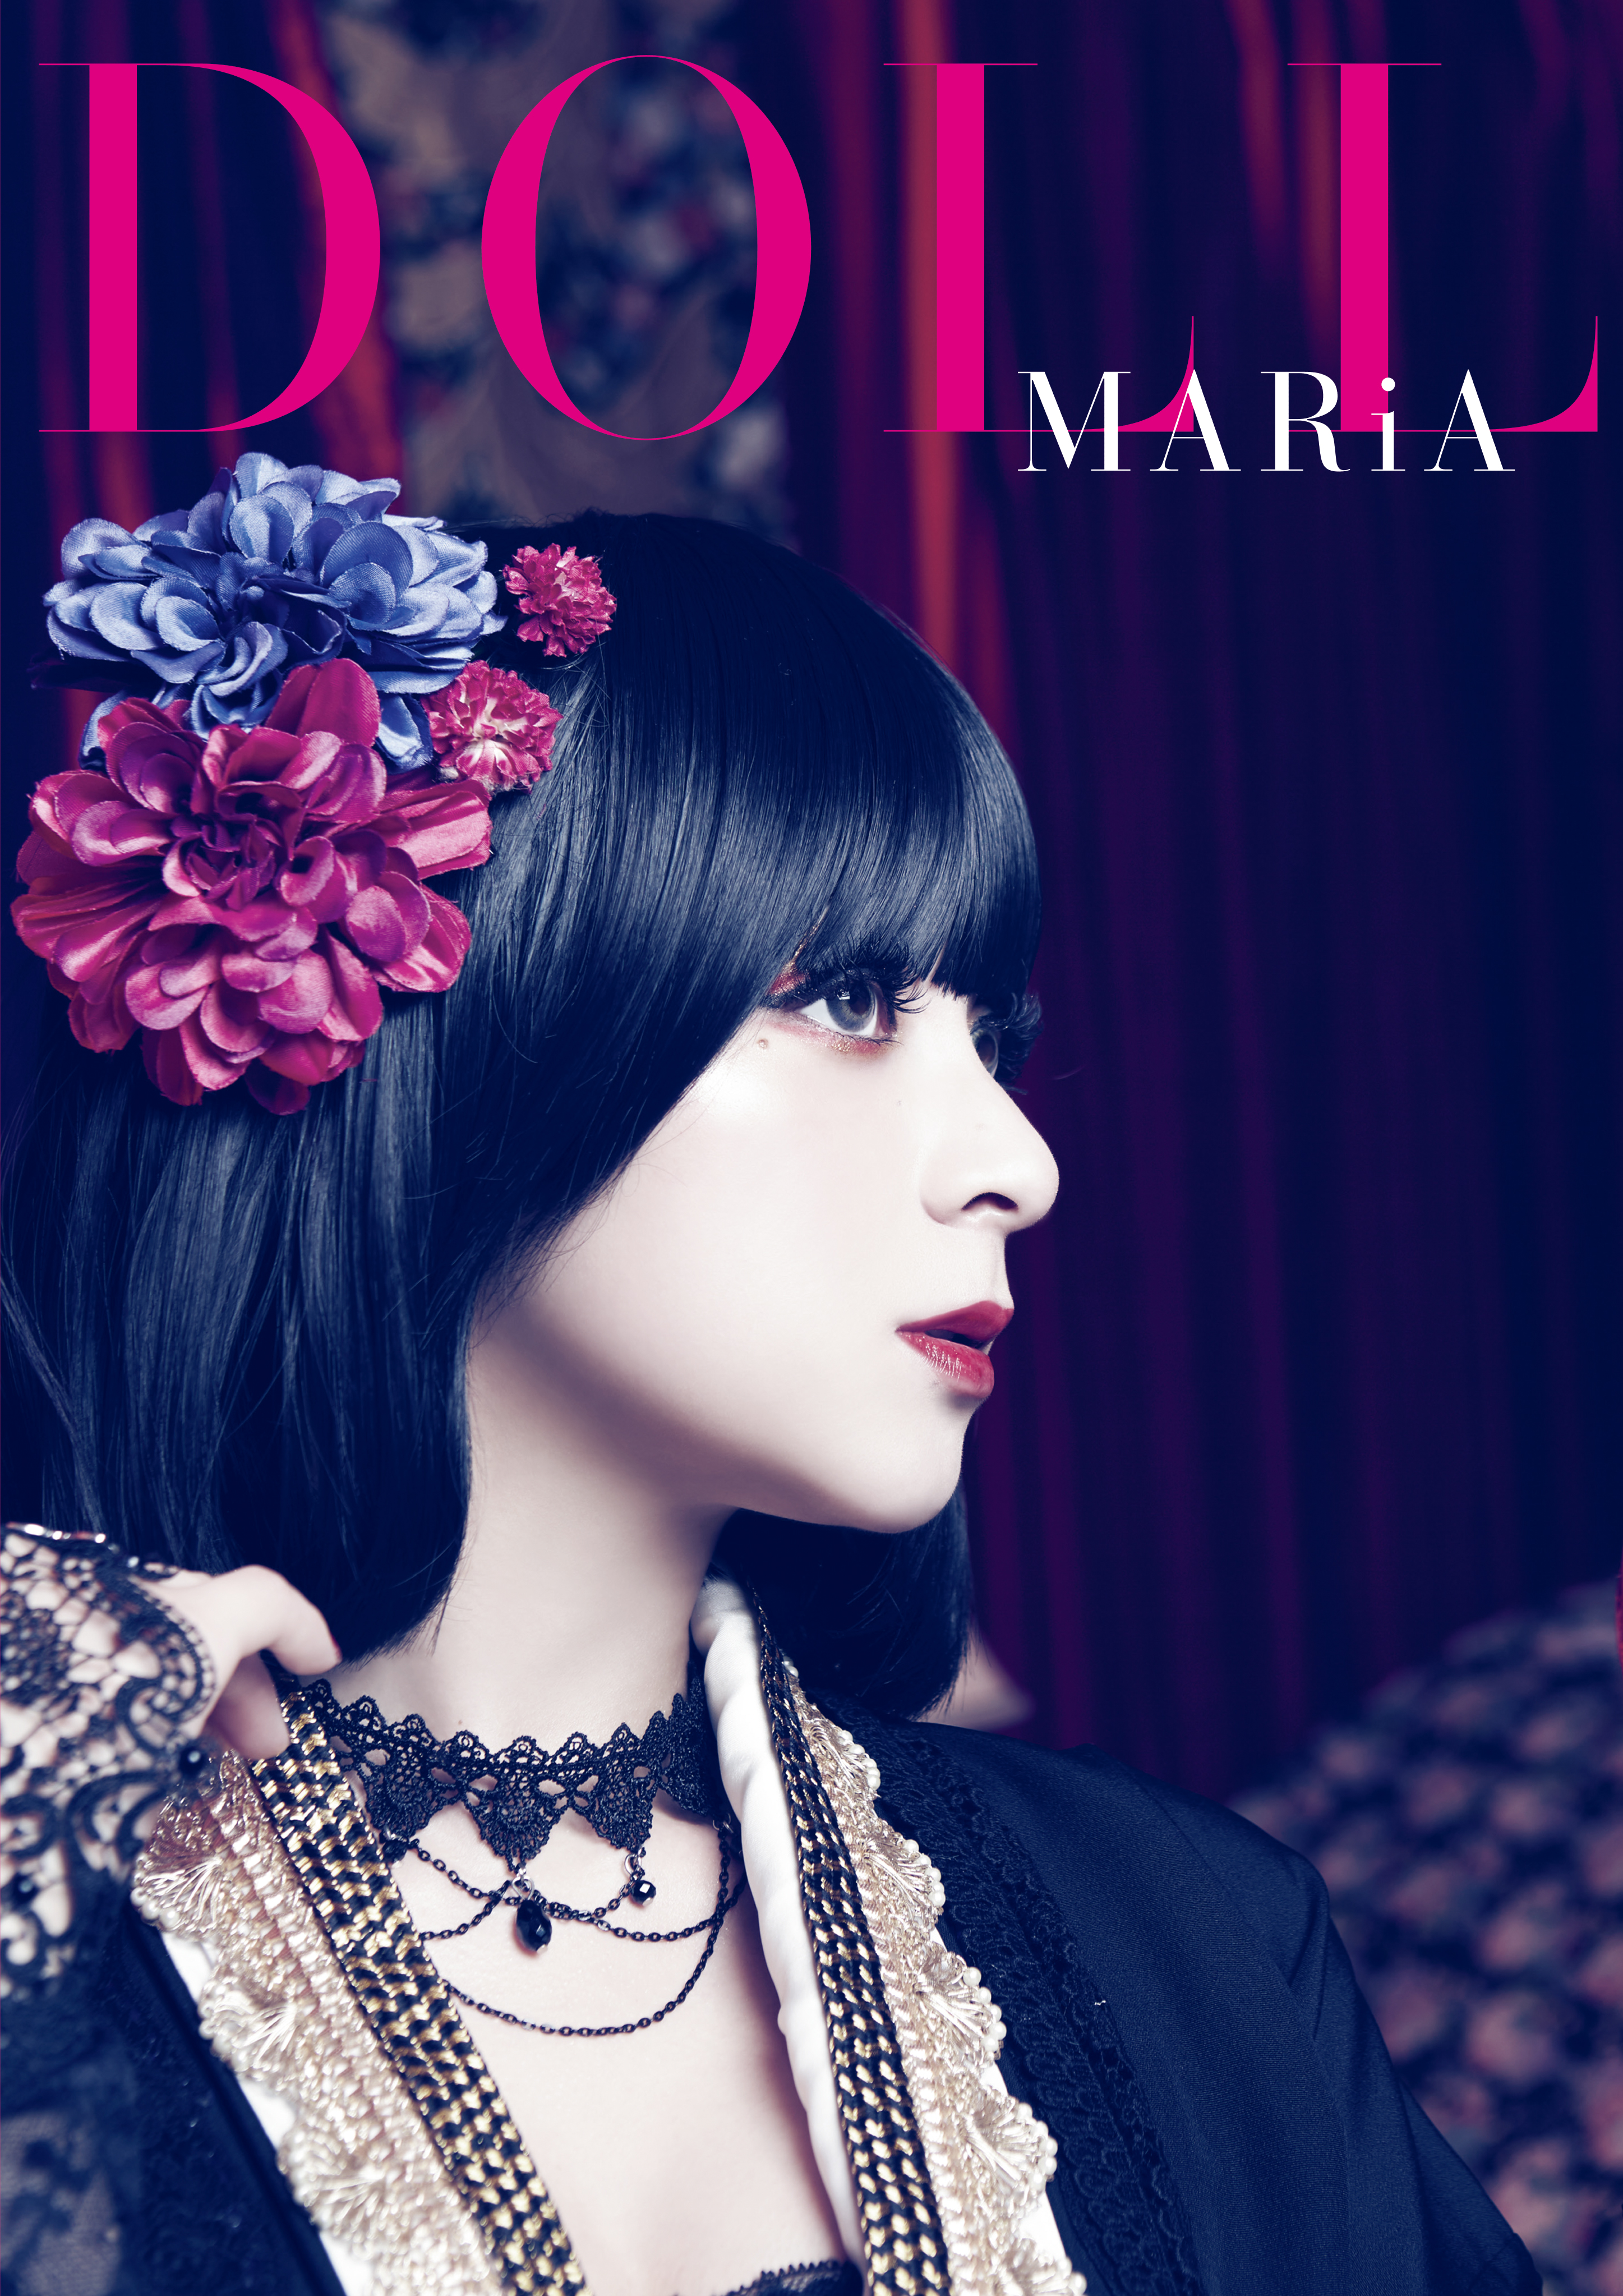 【Ponycanyon Online Limited Version】 MARiA Photobook+Blu-ray “DOLL” Release on Aug 26th,2022